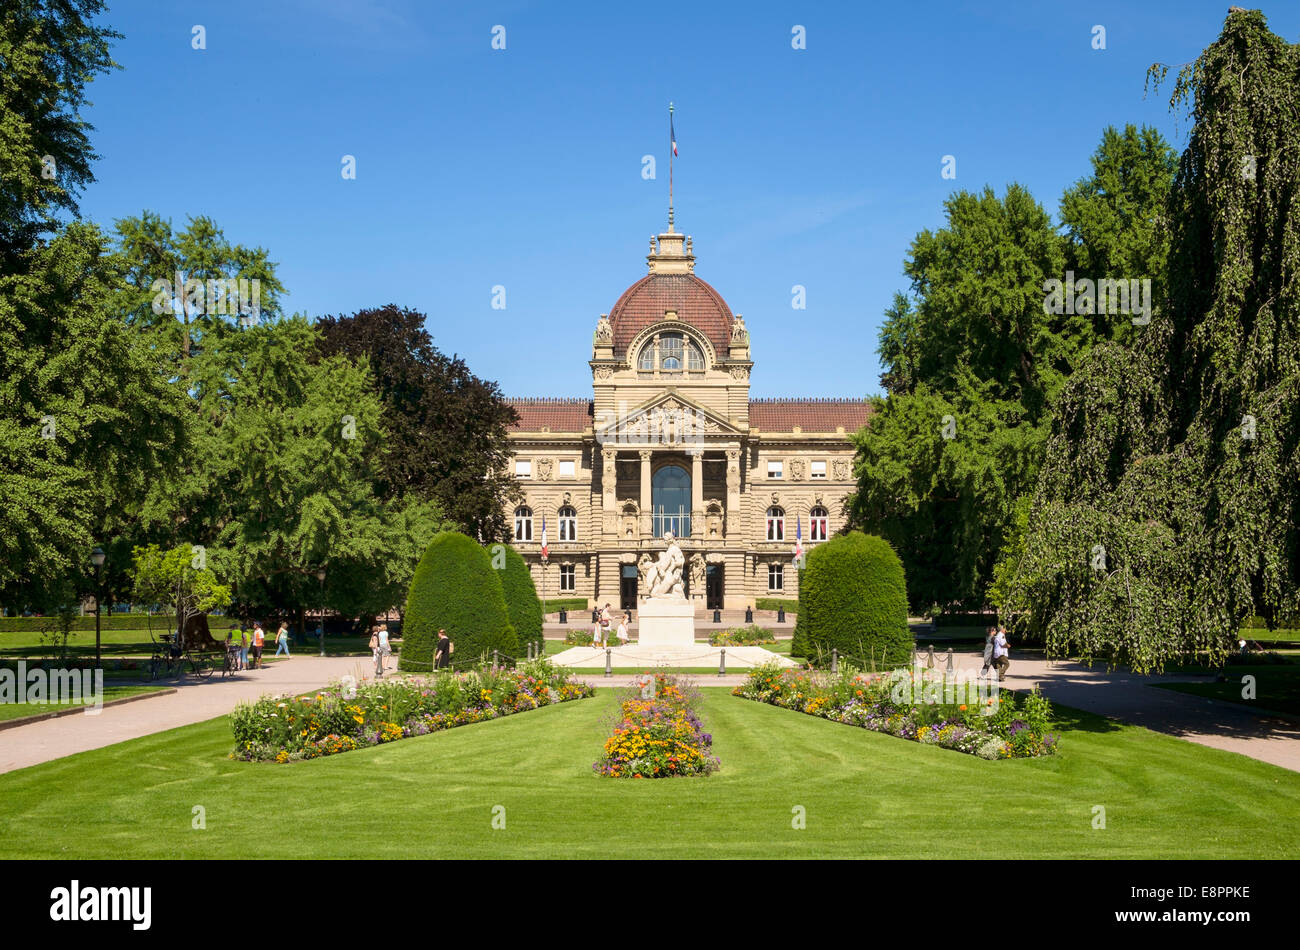 Palais du Rhin or Palace of the Rhine in Strasbourg, France, Europe Stock Photo